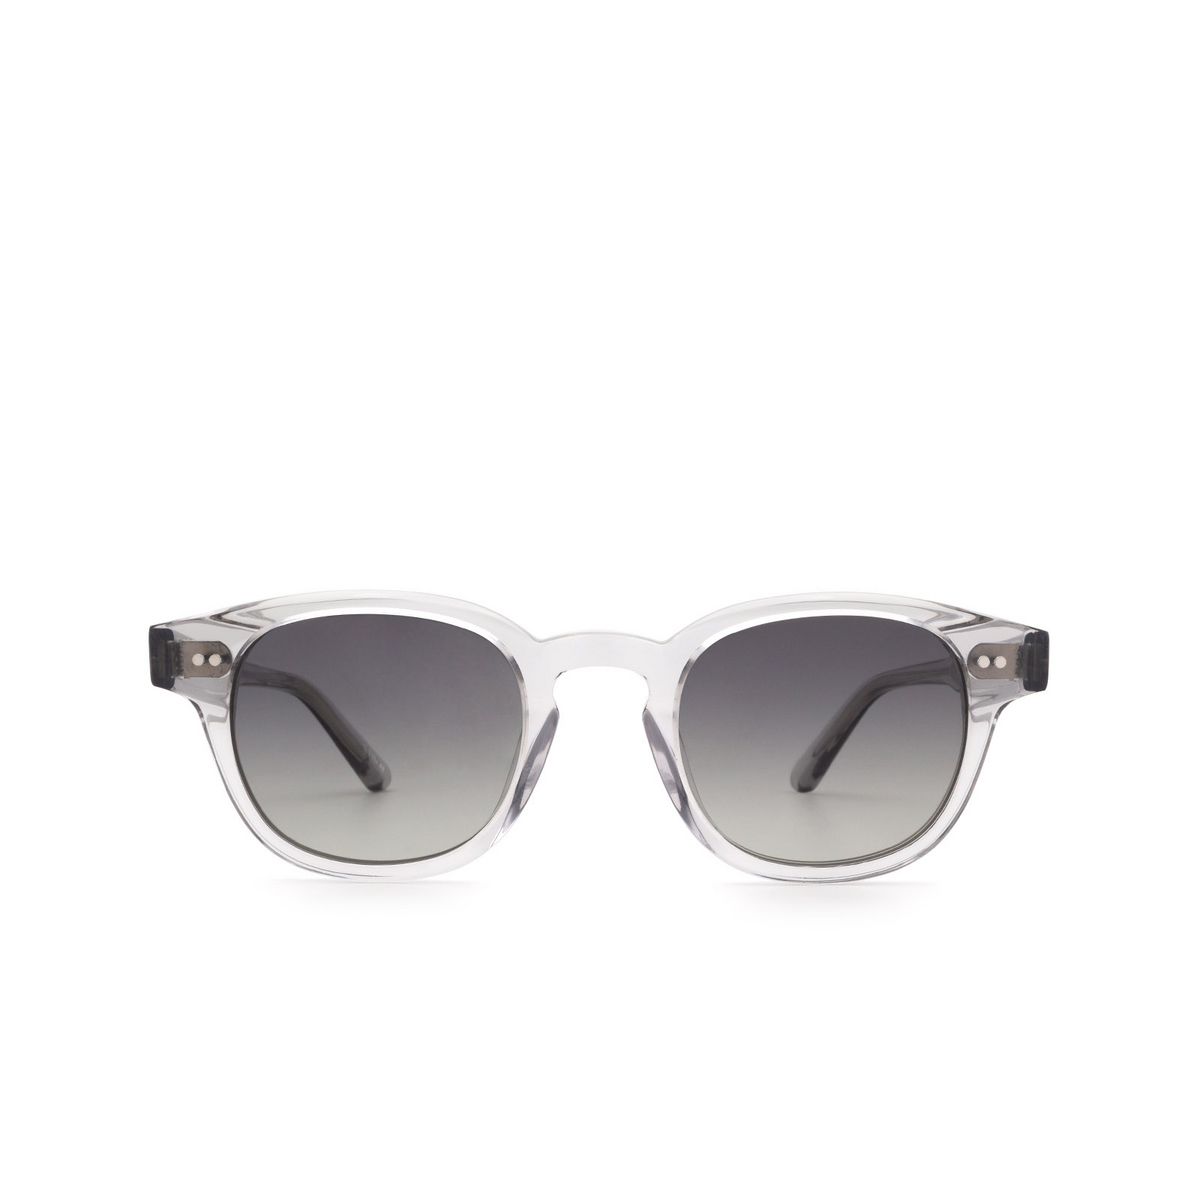 Chimi 01 Sunglasses GREY - front view